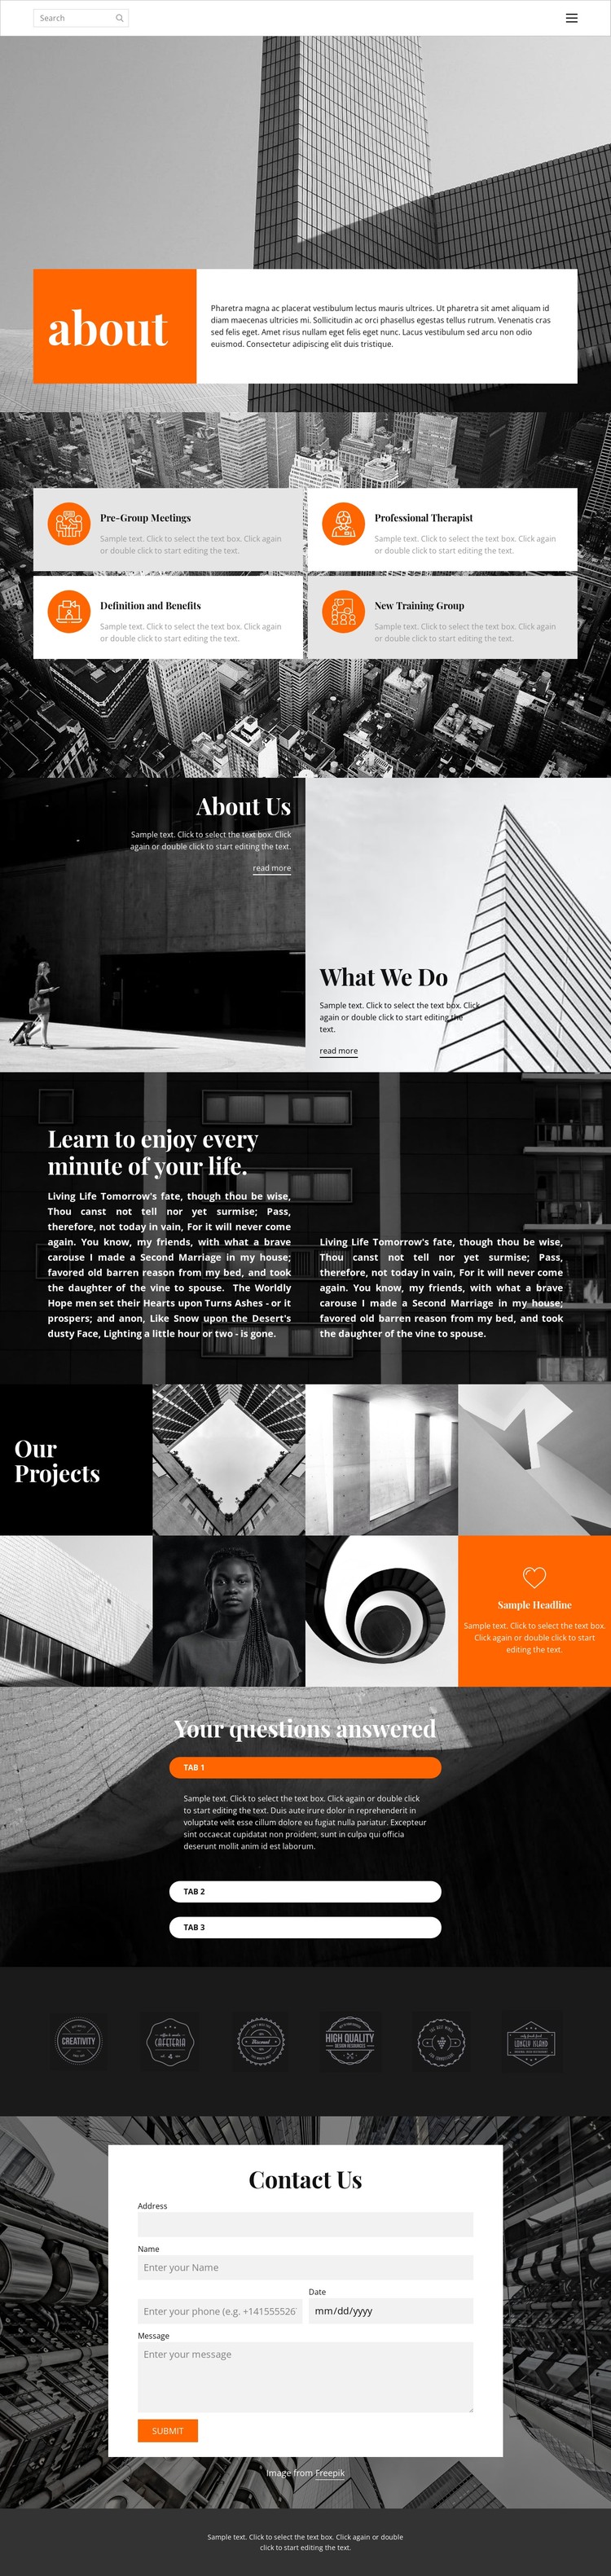 New projects studio CSS Template